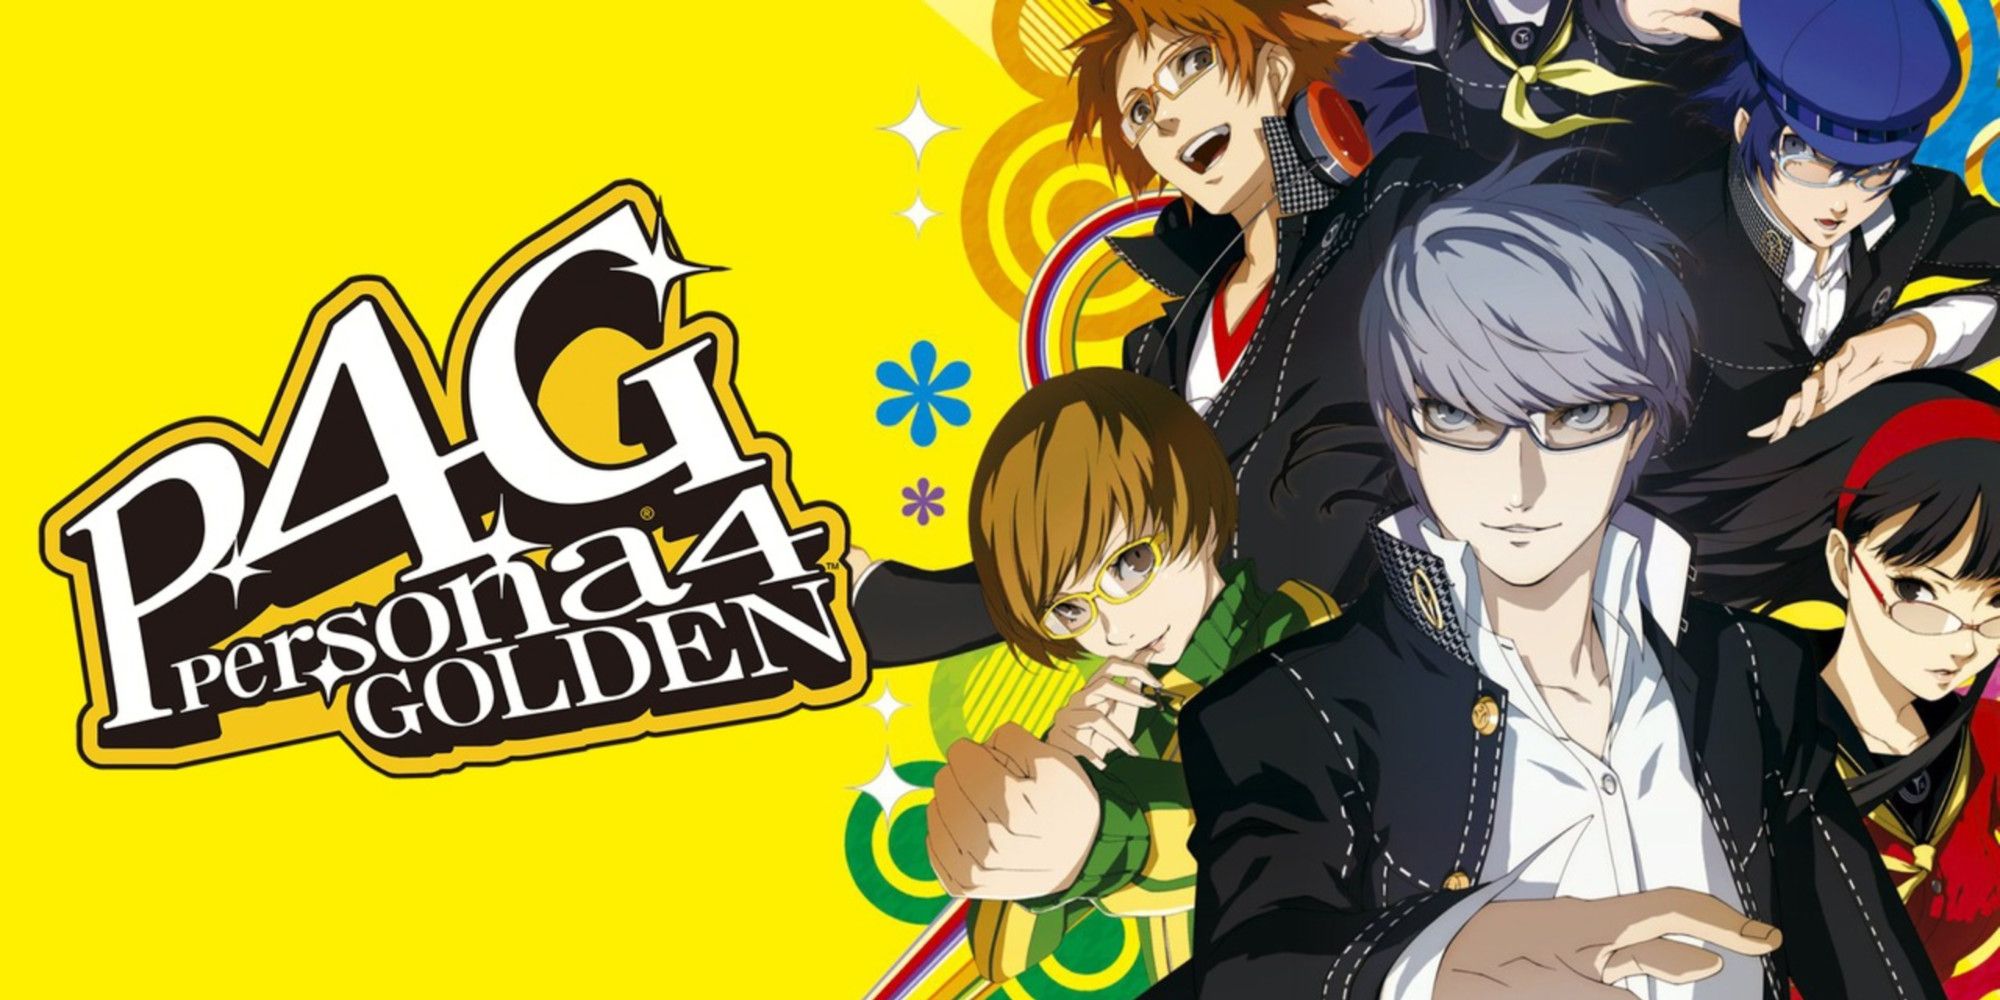 Persona 4 Golden Is One Of The Only Games Currently Not Playable On The Steam Deck